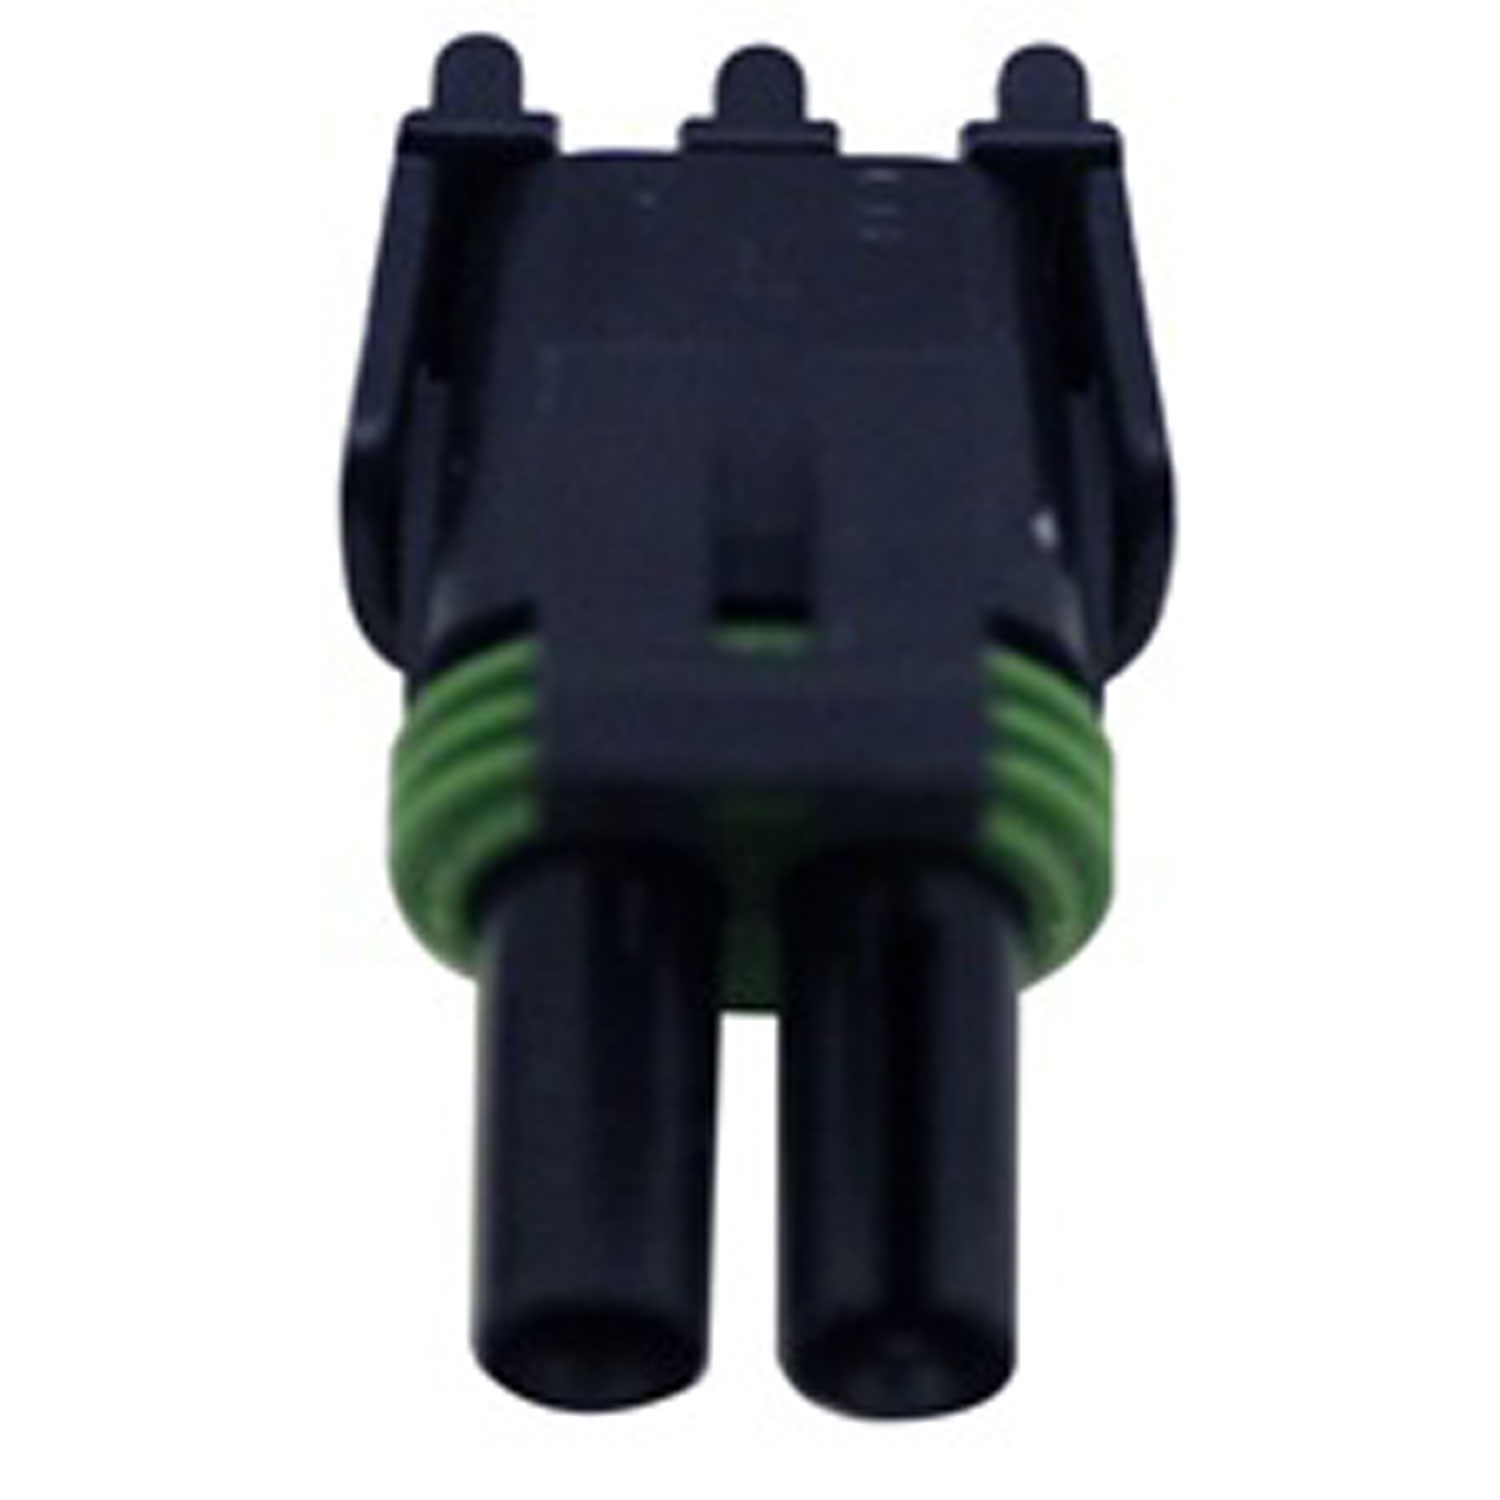 2 WAY MALE WEATHER CONNECTOR (1 EA)